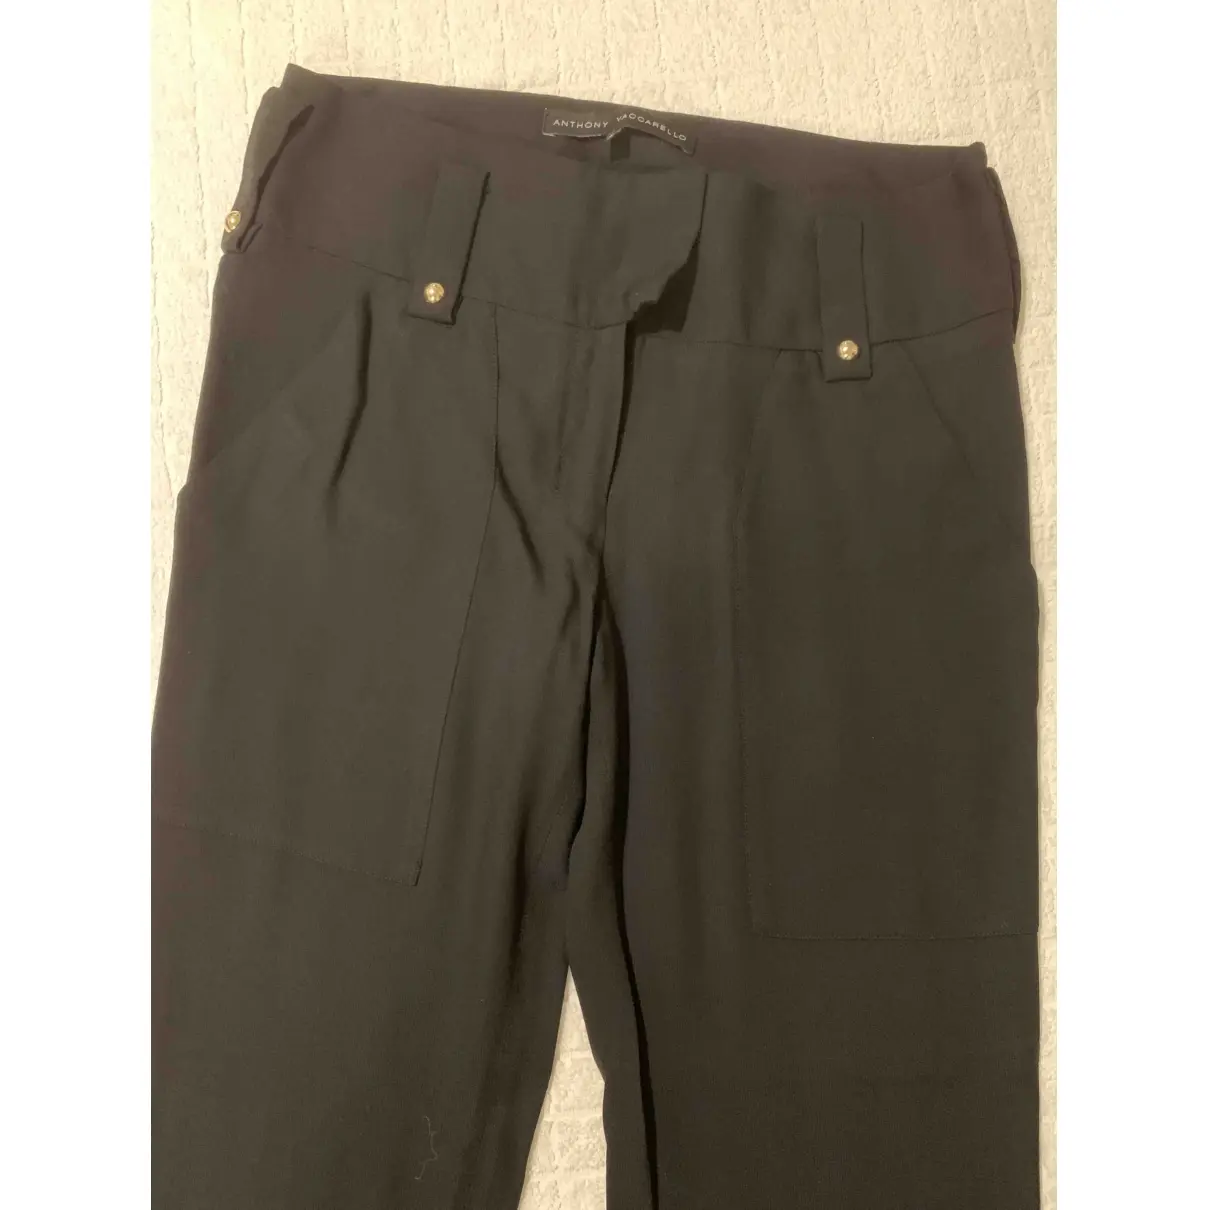 Anthony Vaccarello Carot pants for sale